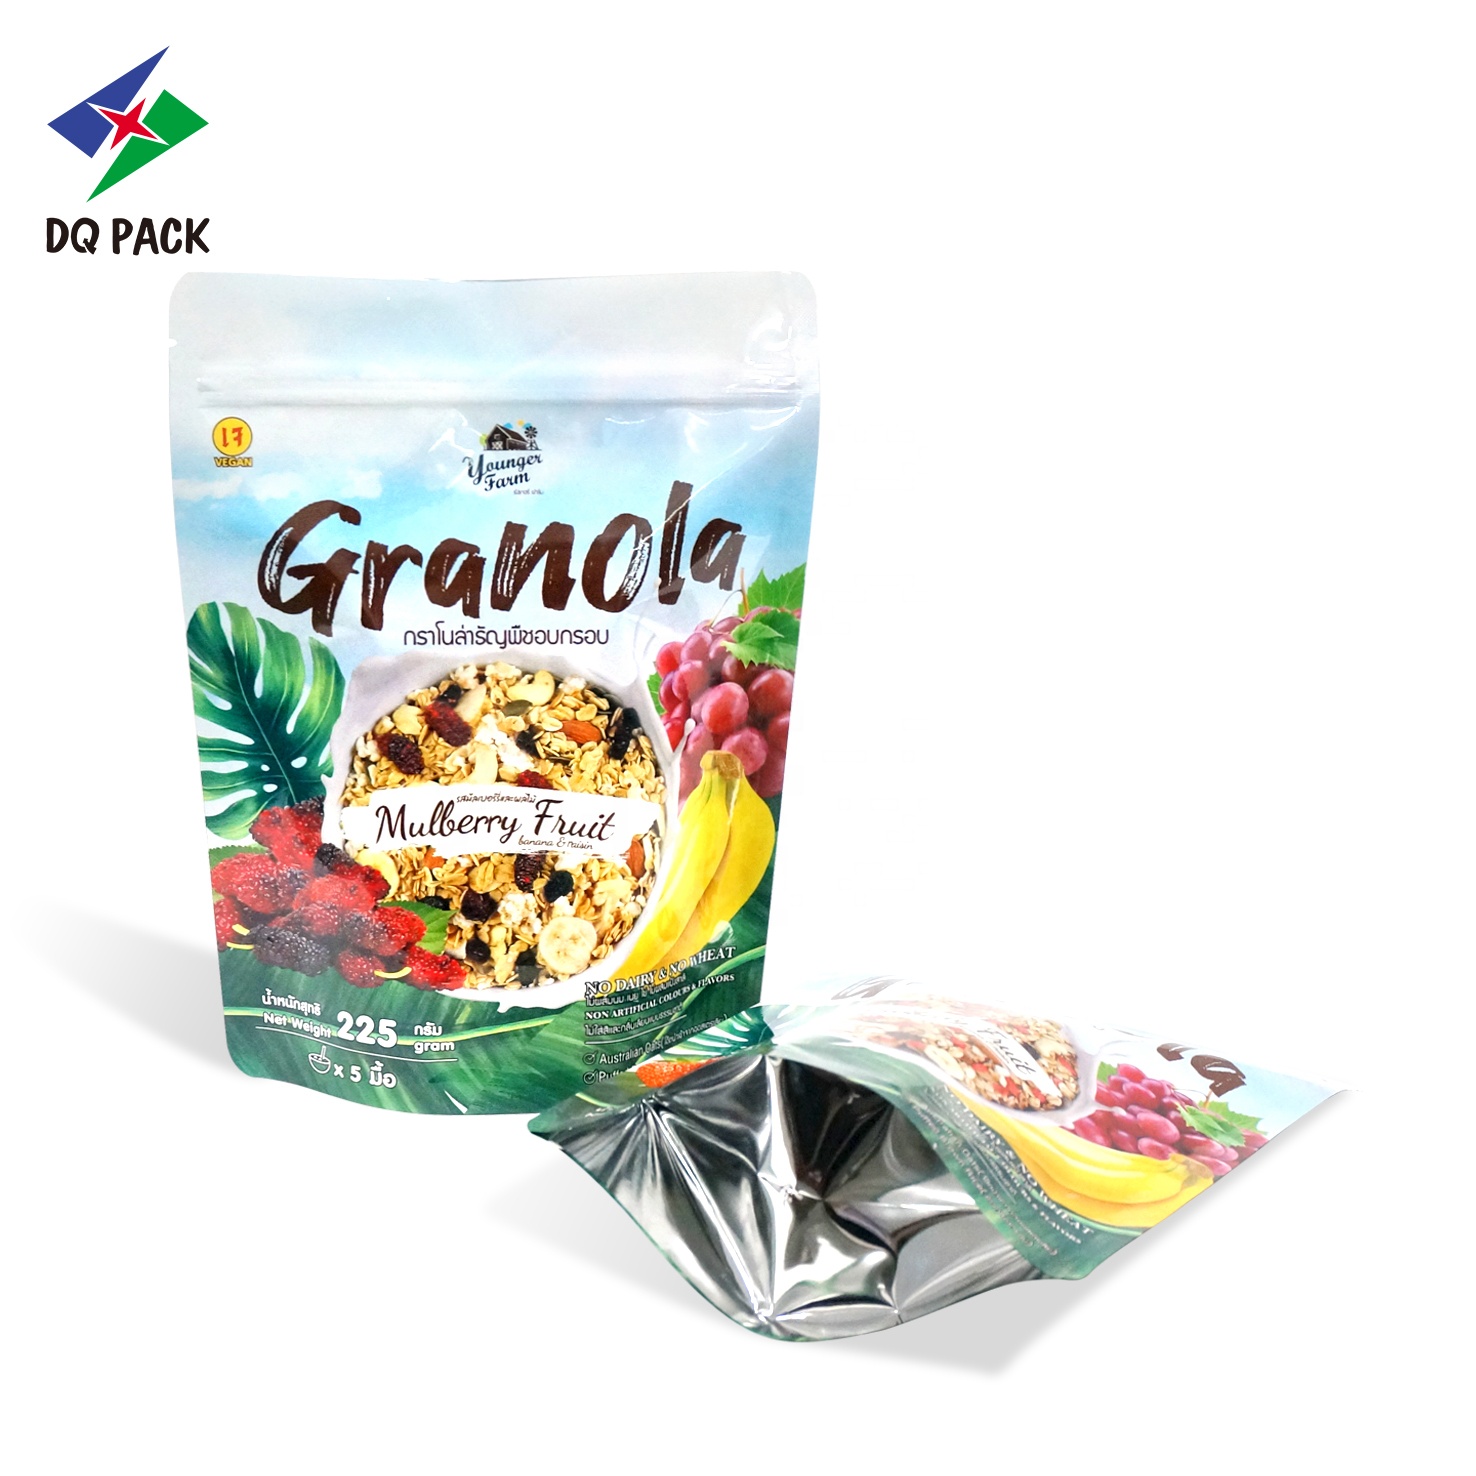 DQ PACK Gravure Printing Reusable plastic mylar bags stand up zipper pouch bag for food snack nut packaging